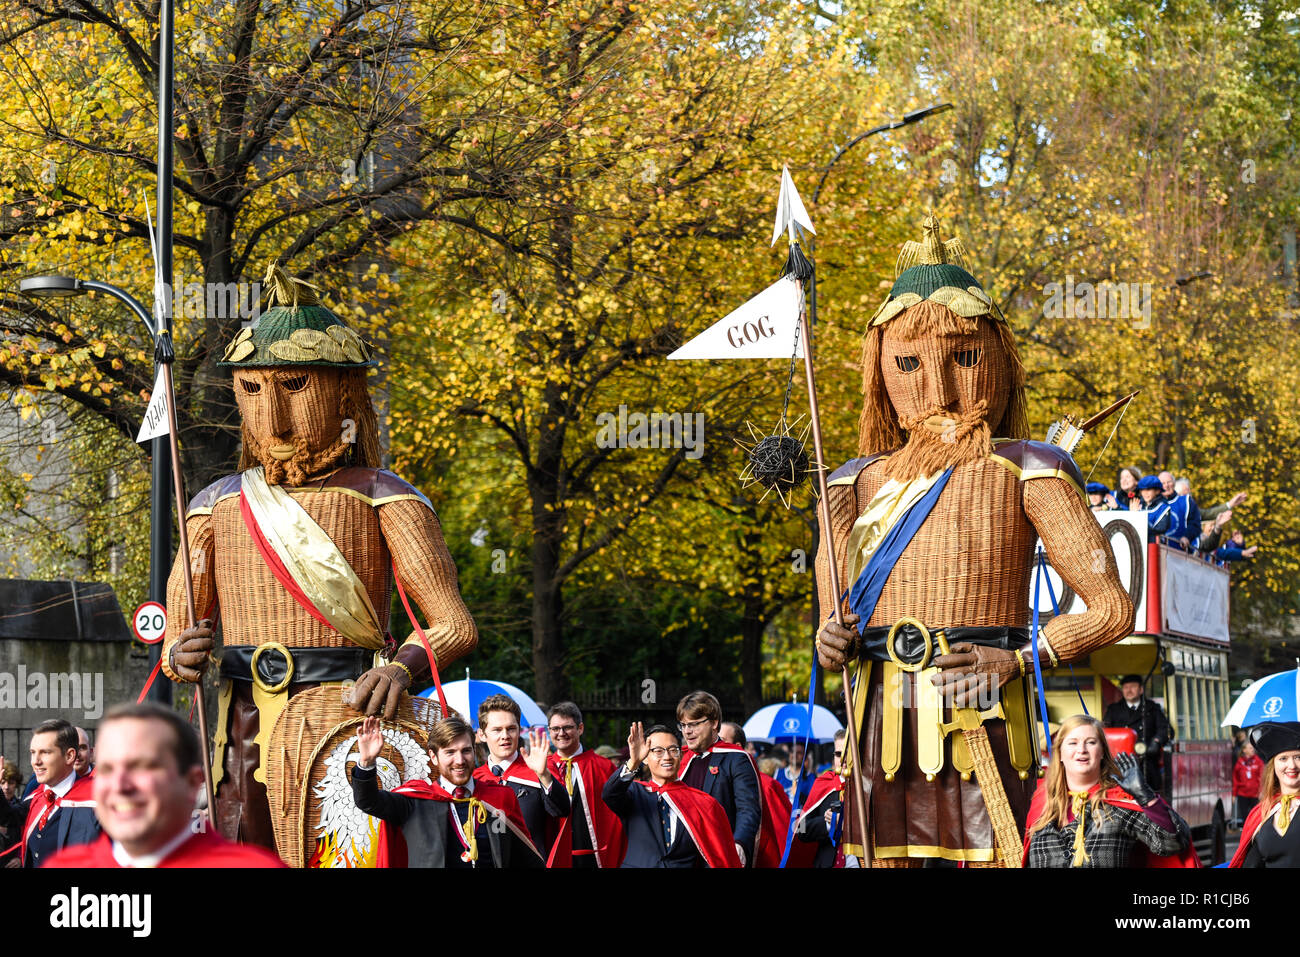 Gog and Magog figures at the Lord Mayor's Show Parade, London, UK 2018 Stock Photo